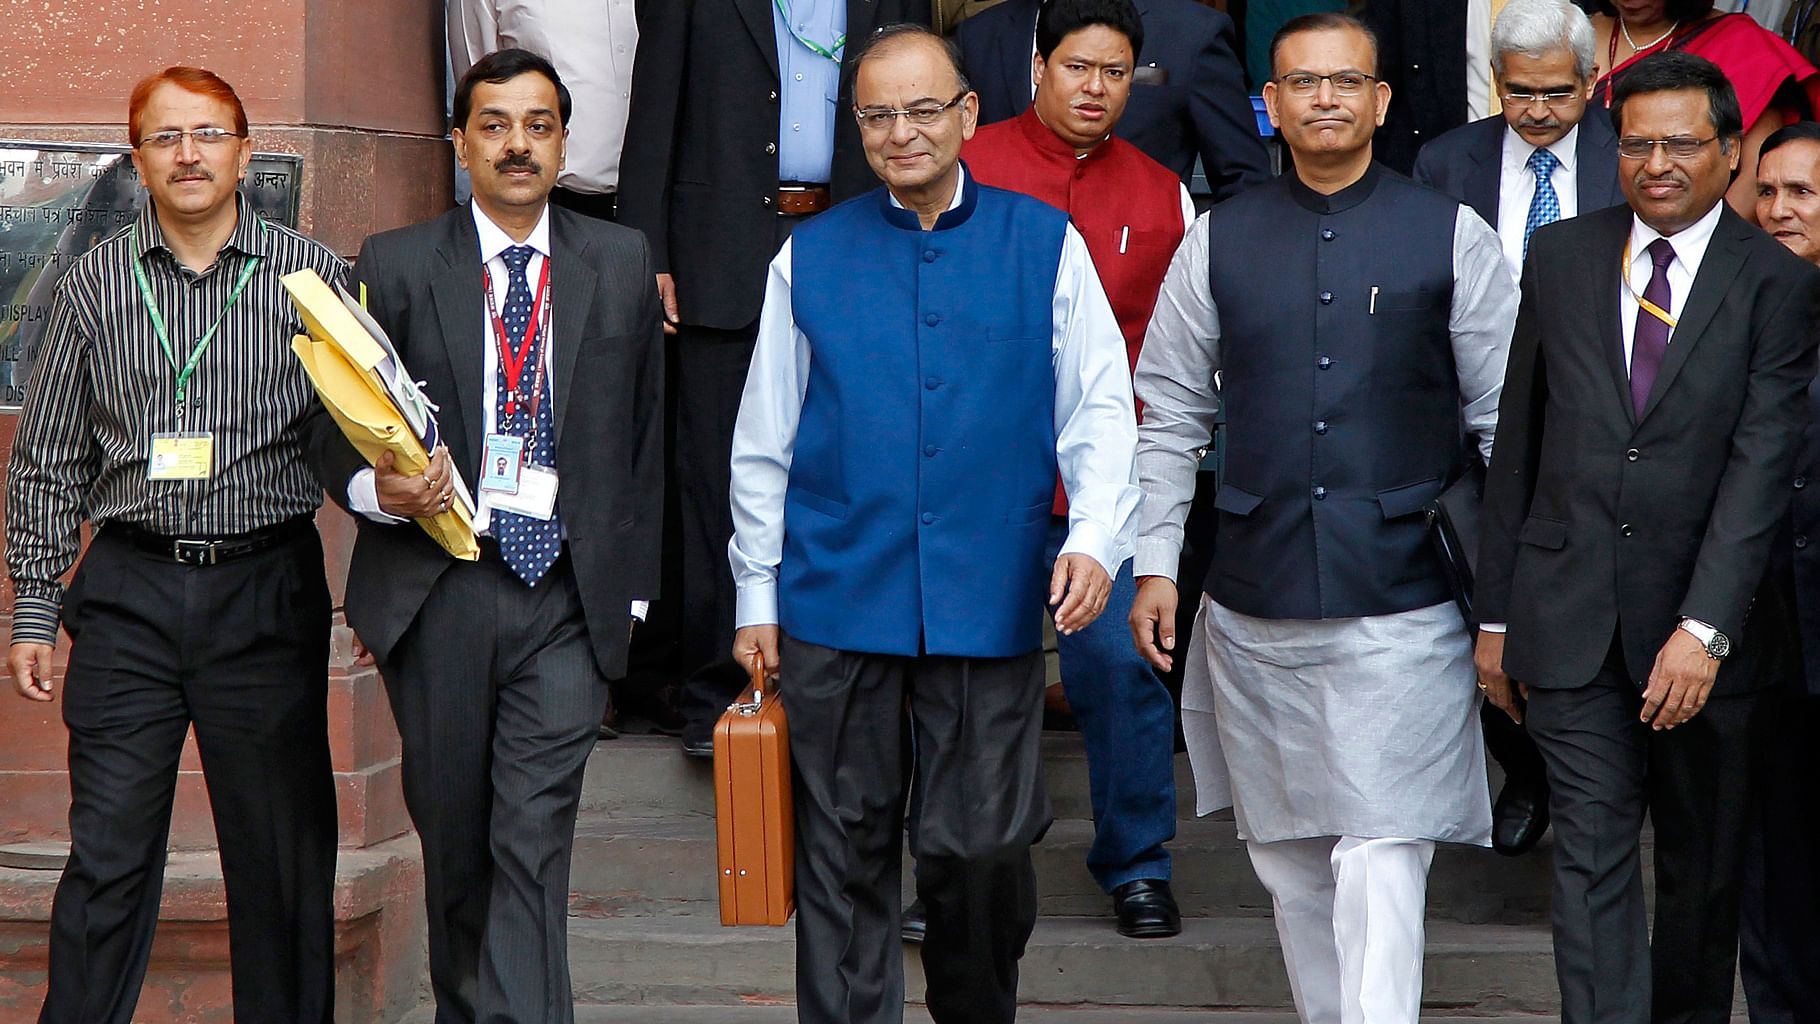 The cabinet on Wednesday agreed to dropping the one percent additional tax on inter-state sales to help the GST Bill through.